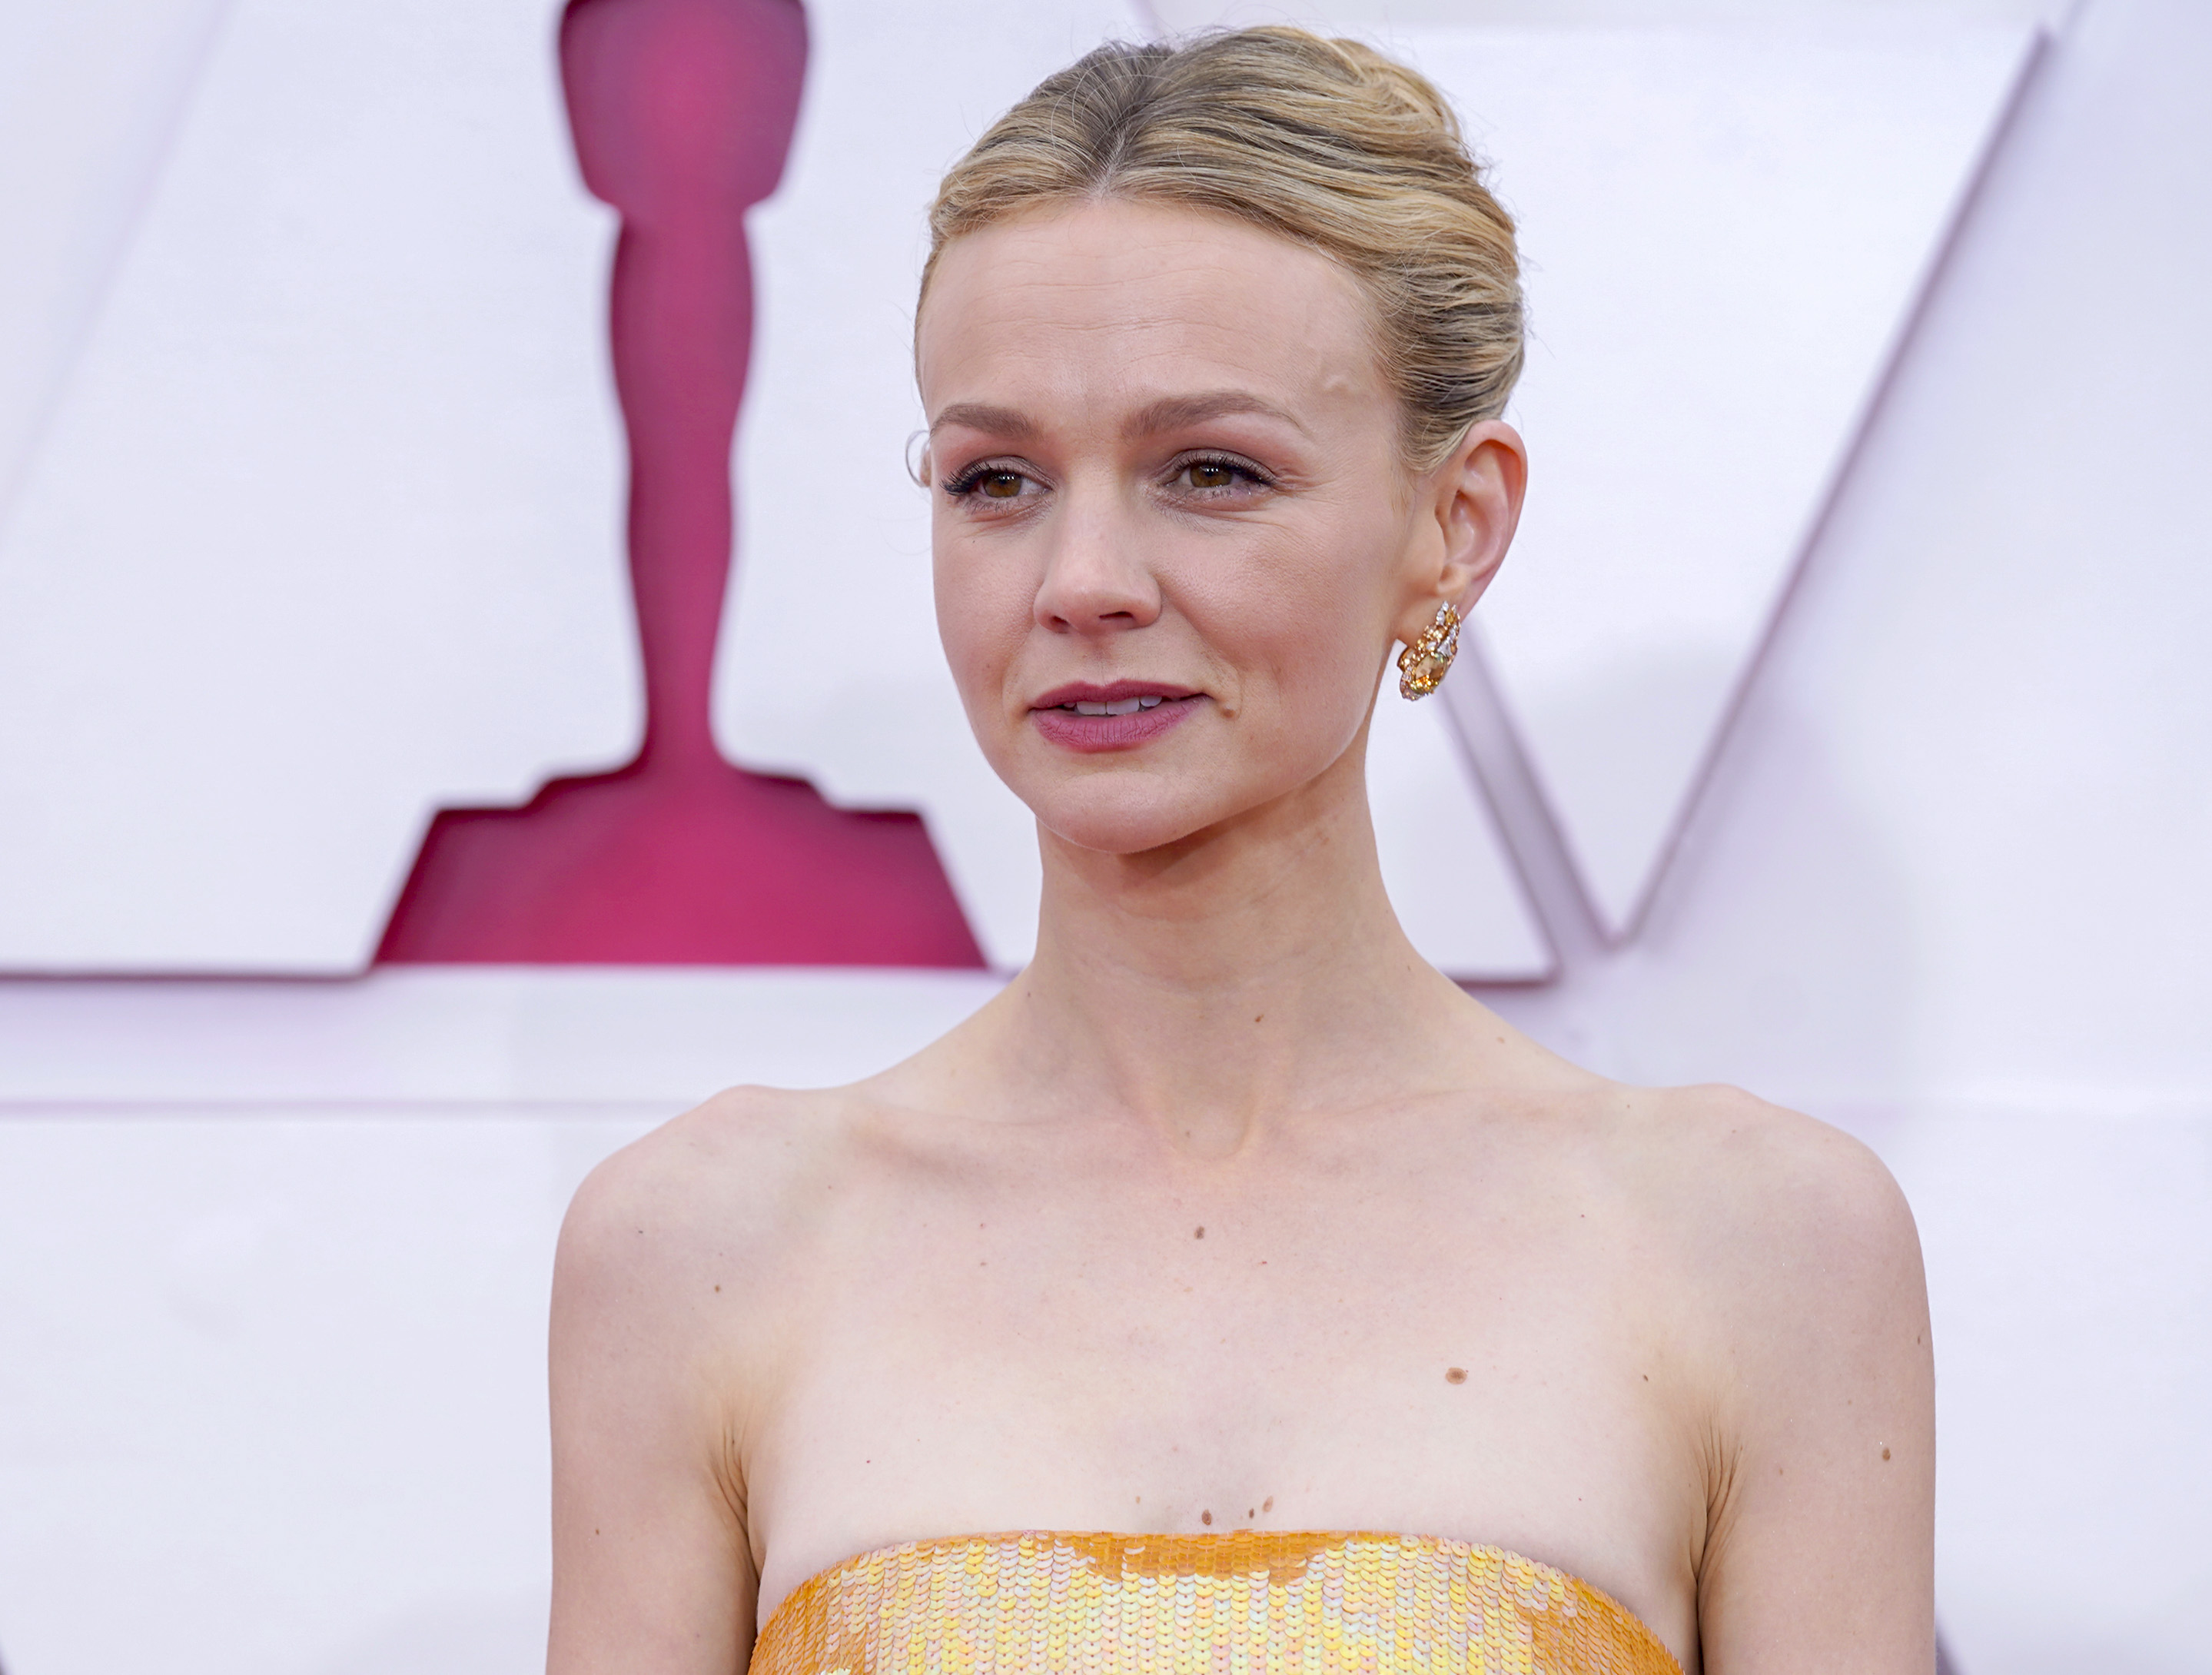 LOS ANGELES, CALIFORNIA â   APRIL 25: Carey Mulligan attends the 93rd Annual Academy Awards at Union Station on April 25, 2021 in Los Angeles, California. (Photo by Chris Pizzello-Pool/Getty Images)